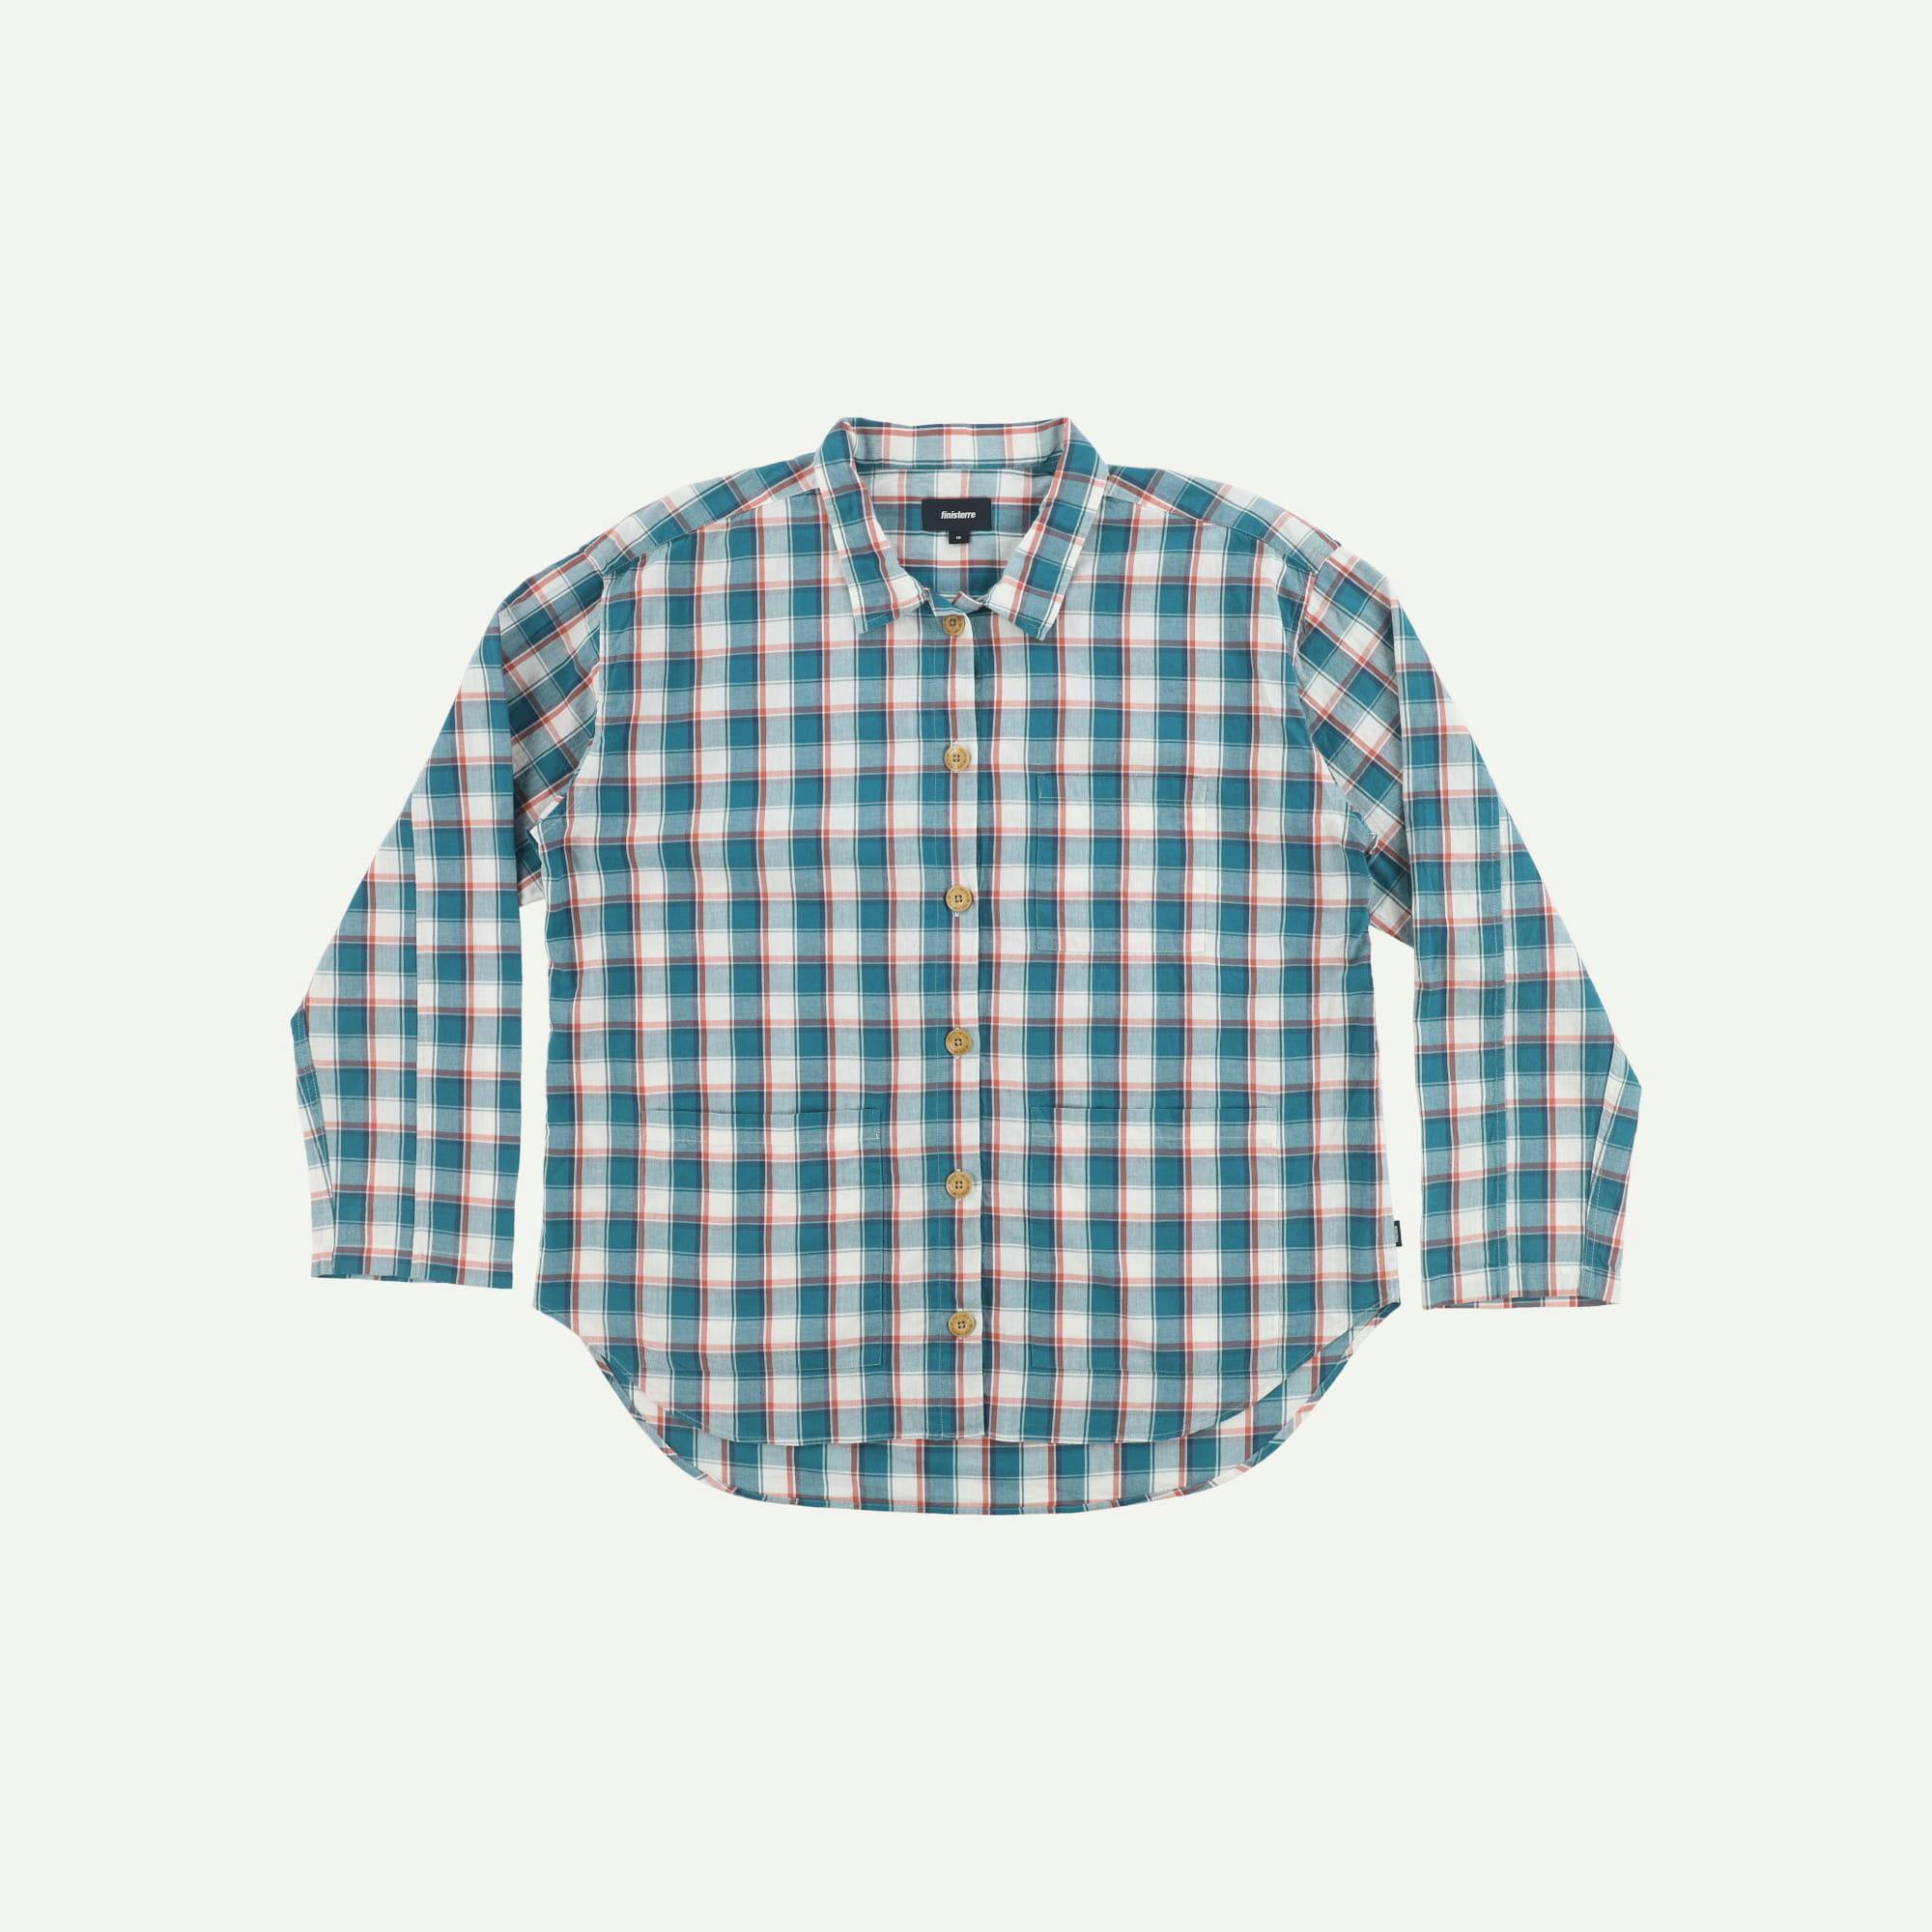 Finisterre As new Multi Coloured Shirt